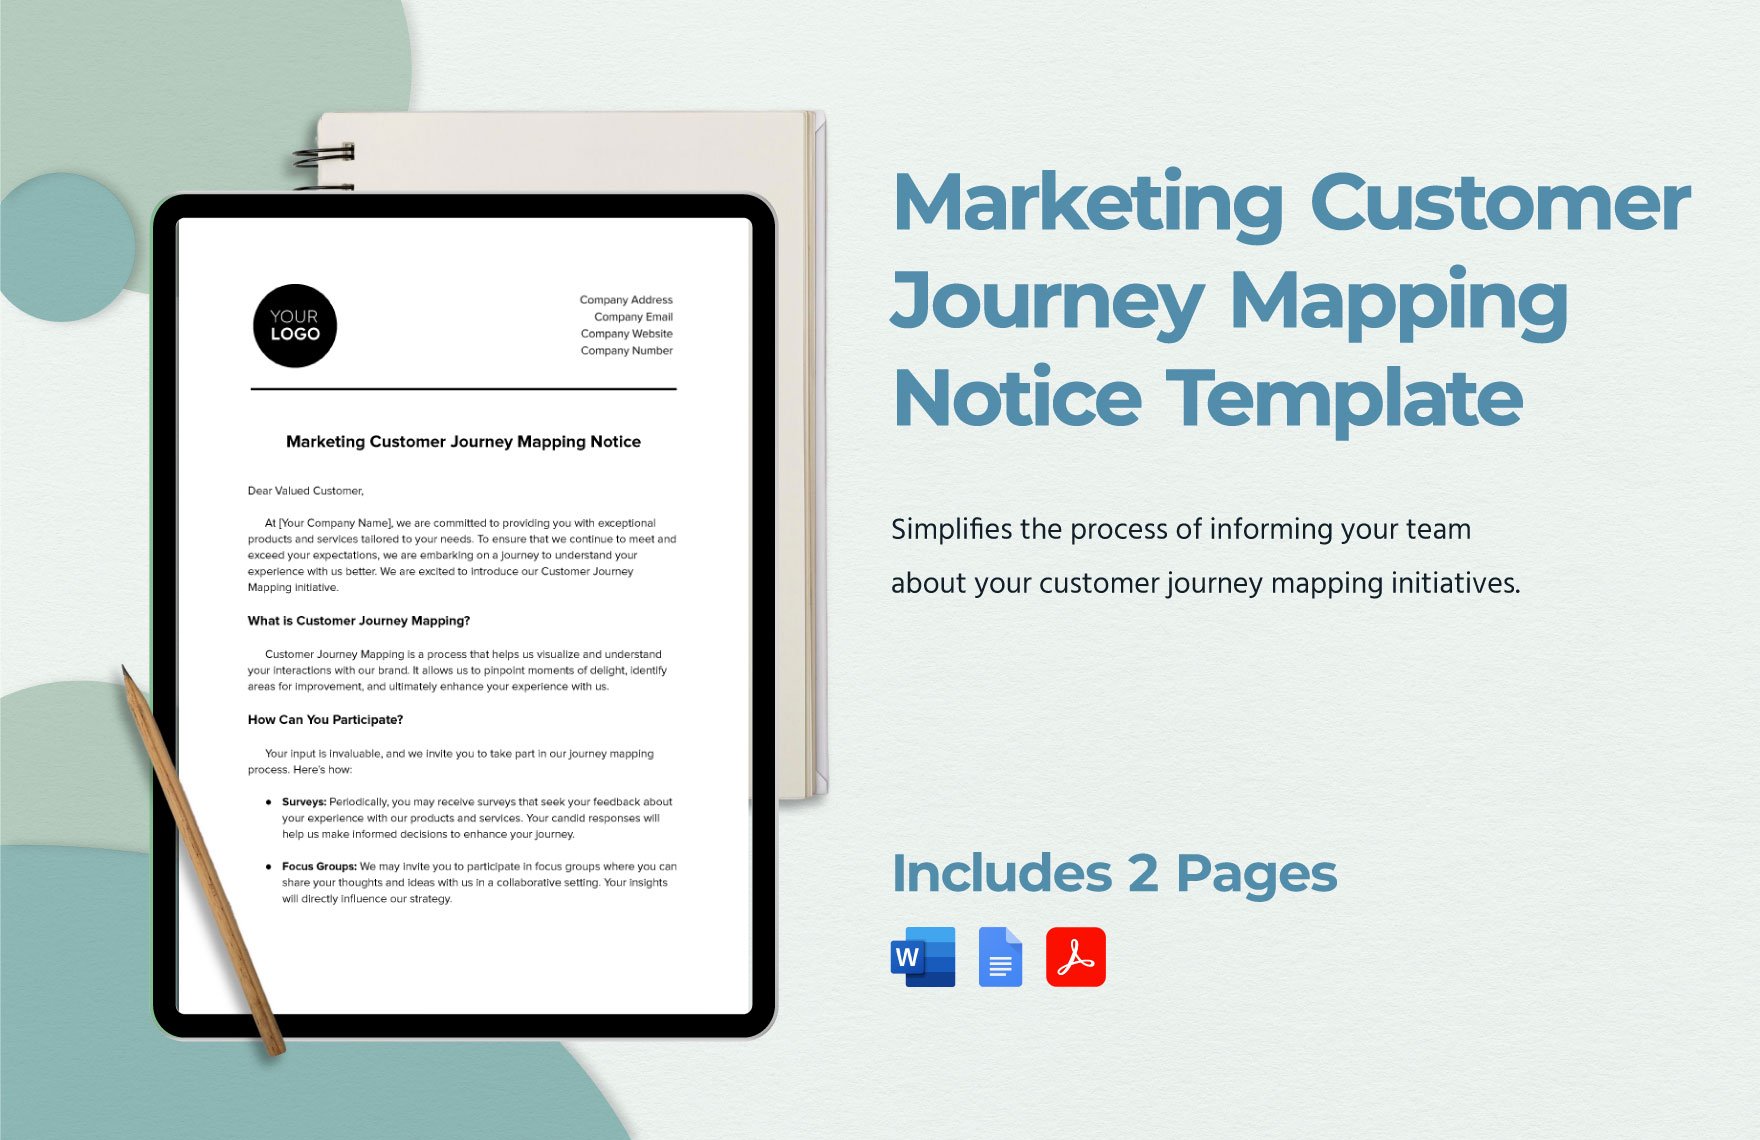 Marketing Customer Journey Mapping Notice Template